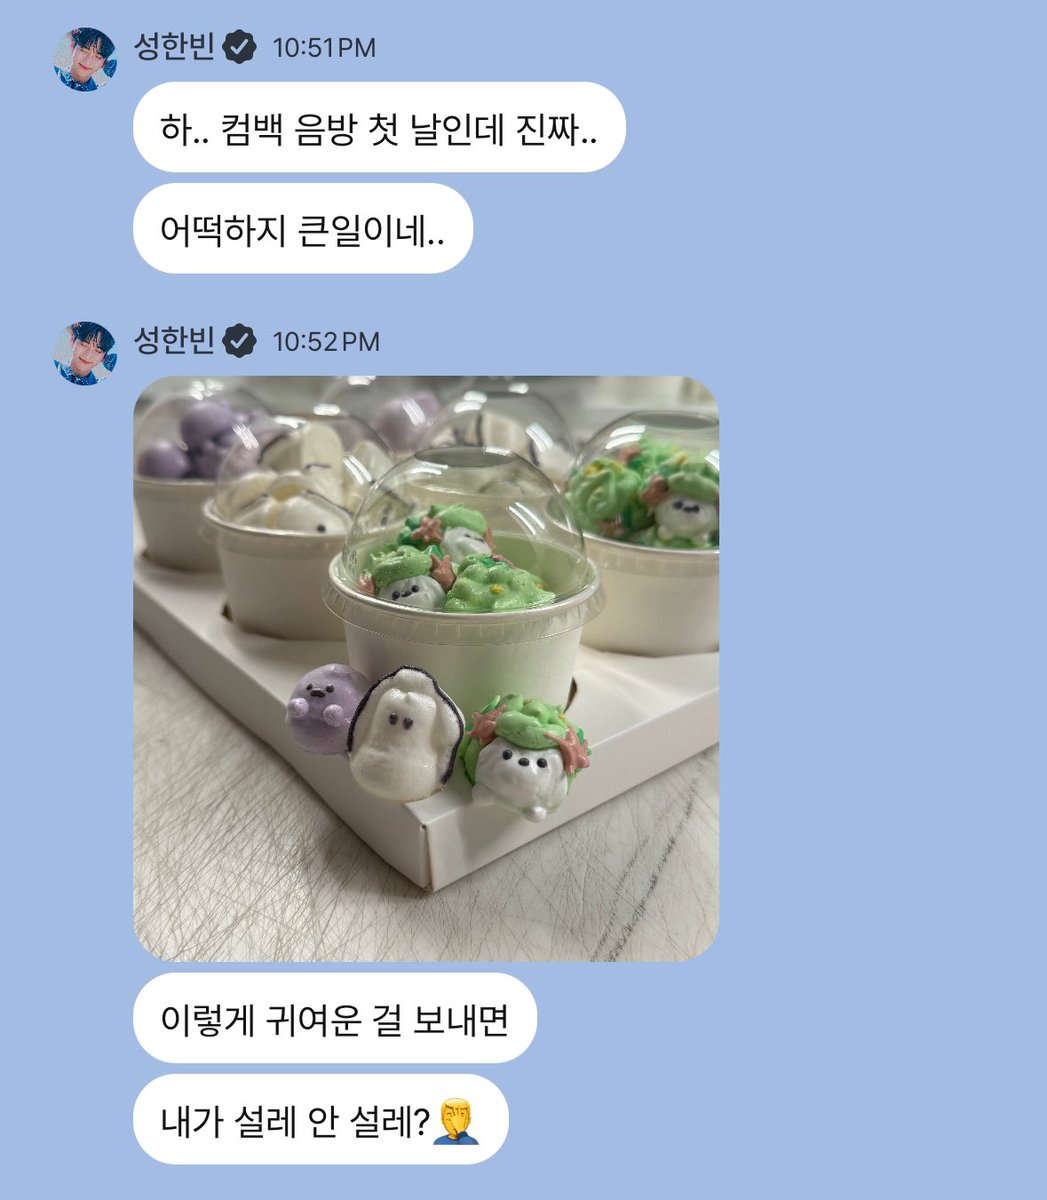 HANBIN MCOUNTDOWN SUPPORT TODAY IS SO CUTE 🥺 ditto, oyster and shaymin